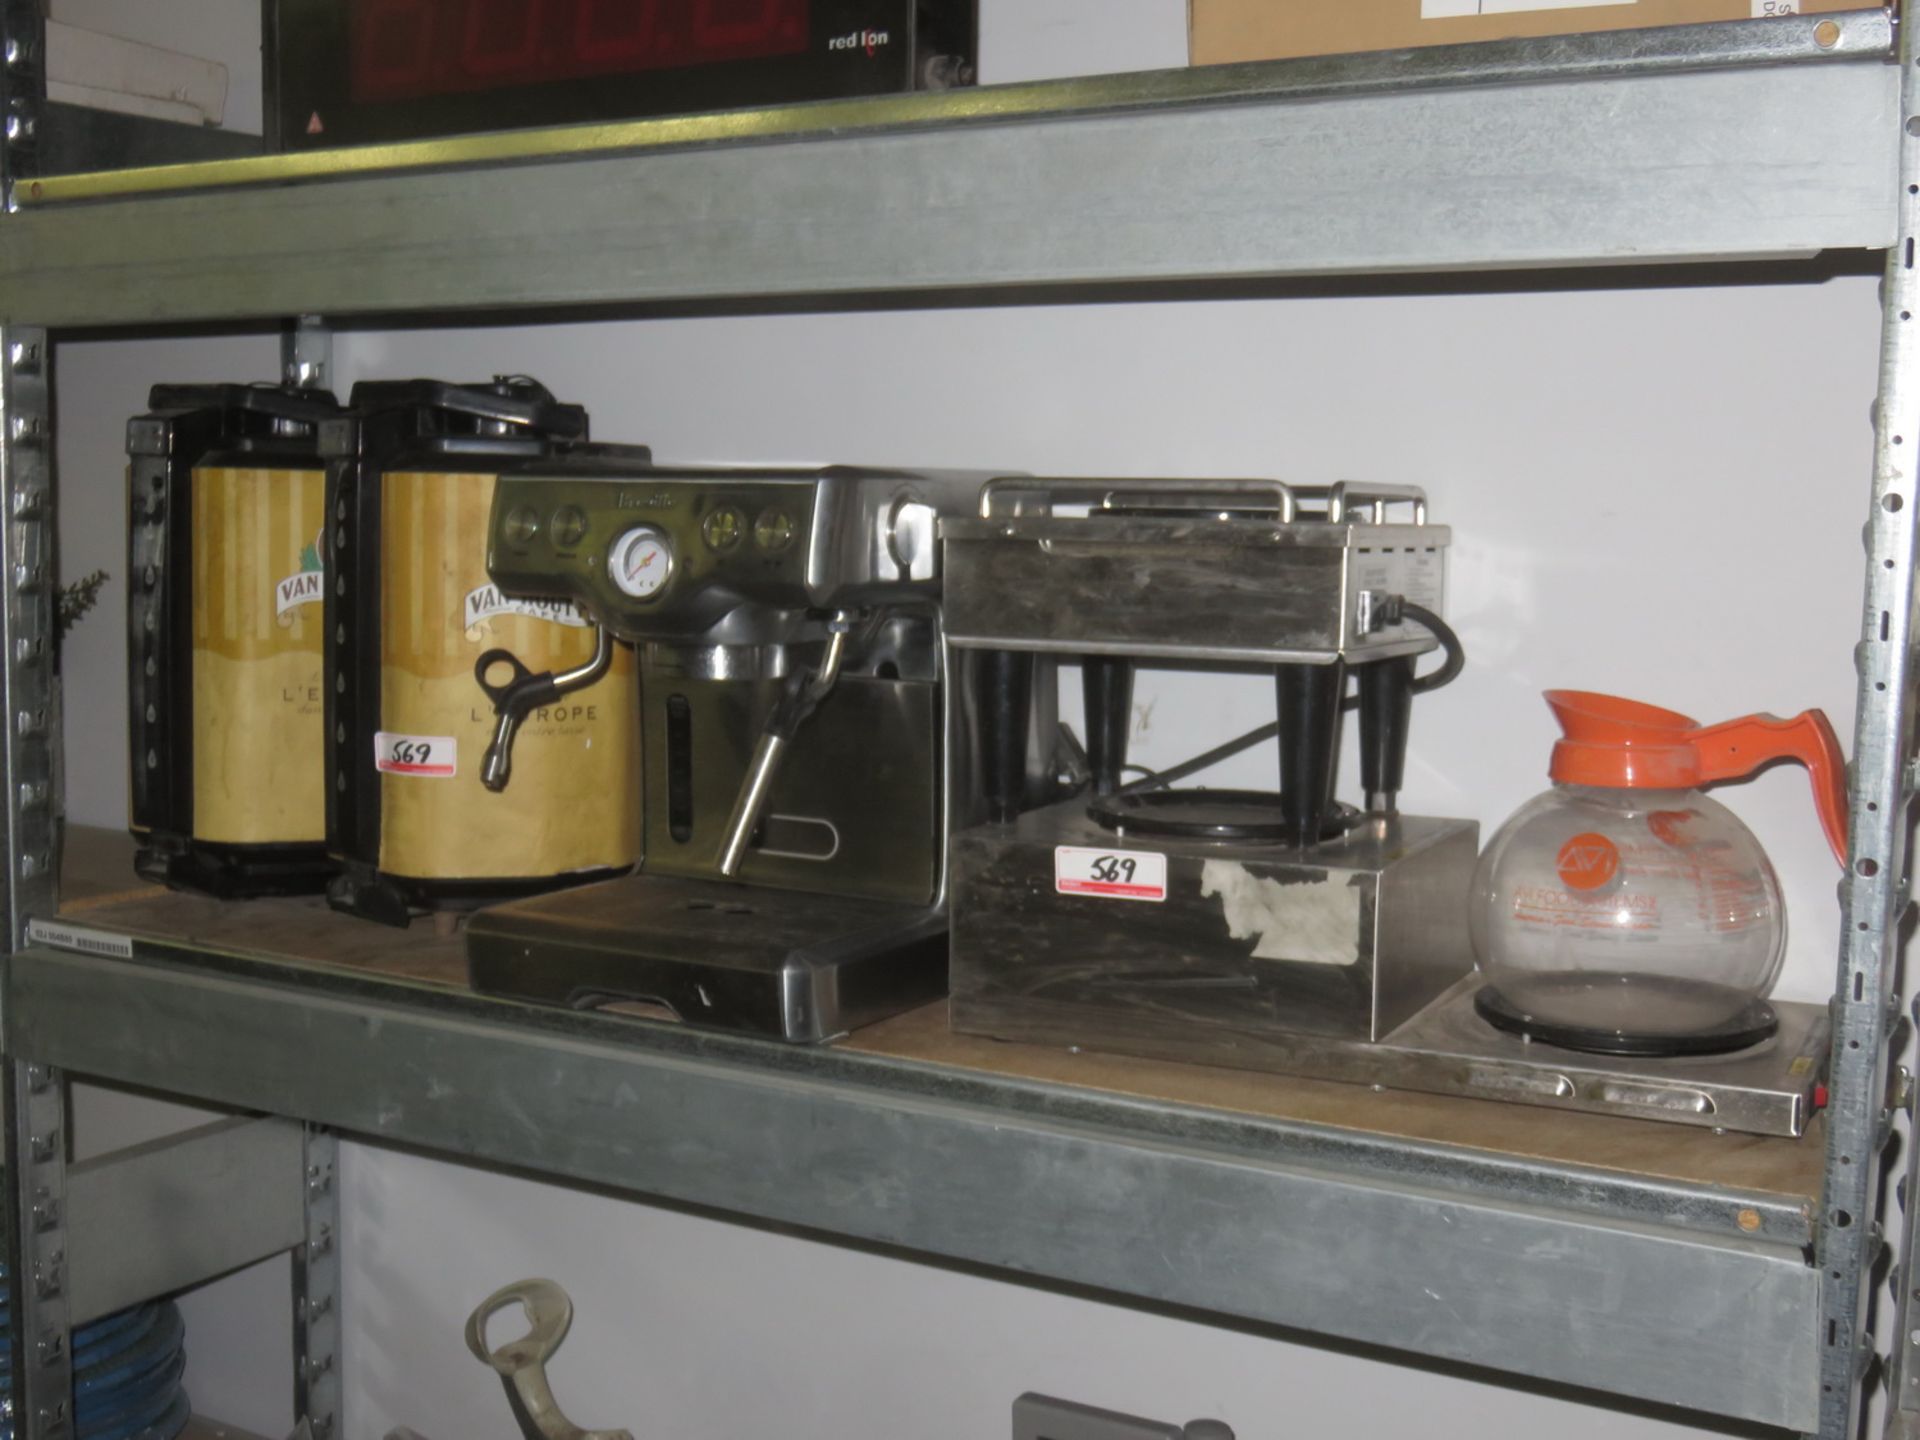 LOT - BREVILLE ESPRESSO MACHINE (NO COFFEE HANDLE), ELECTRIC COFFEE HEATER + CANISTERS